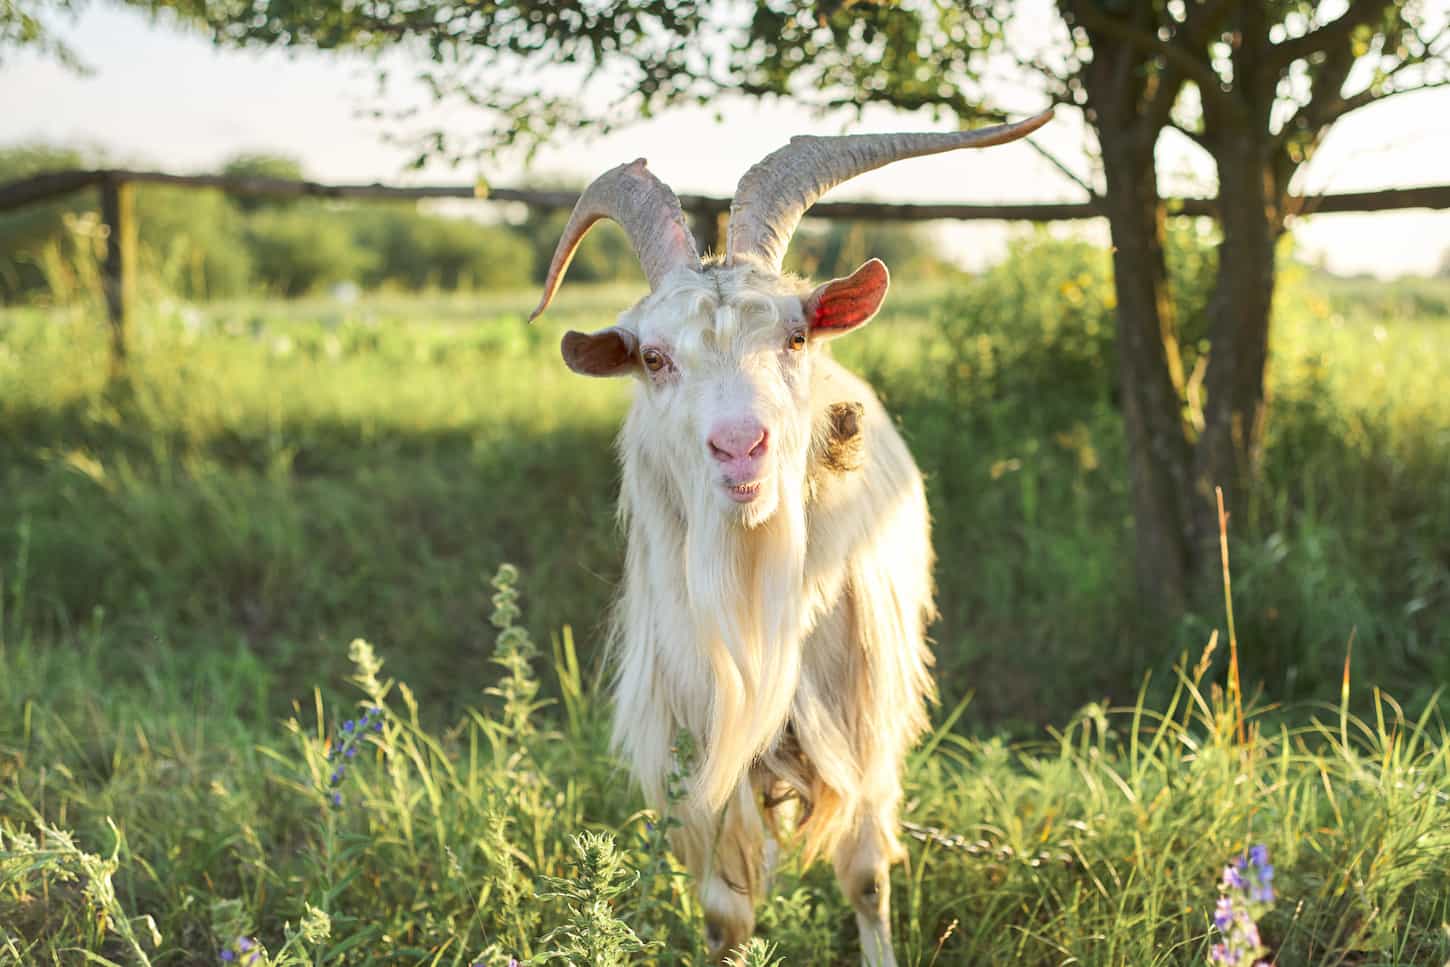 An image of an old horned bearded white goat looking through the camera on a field.